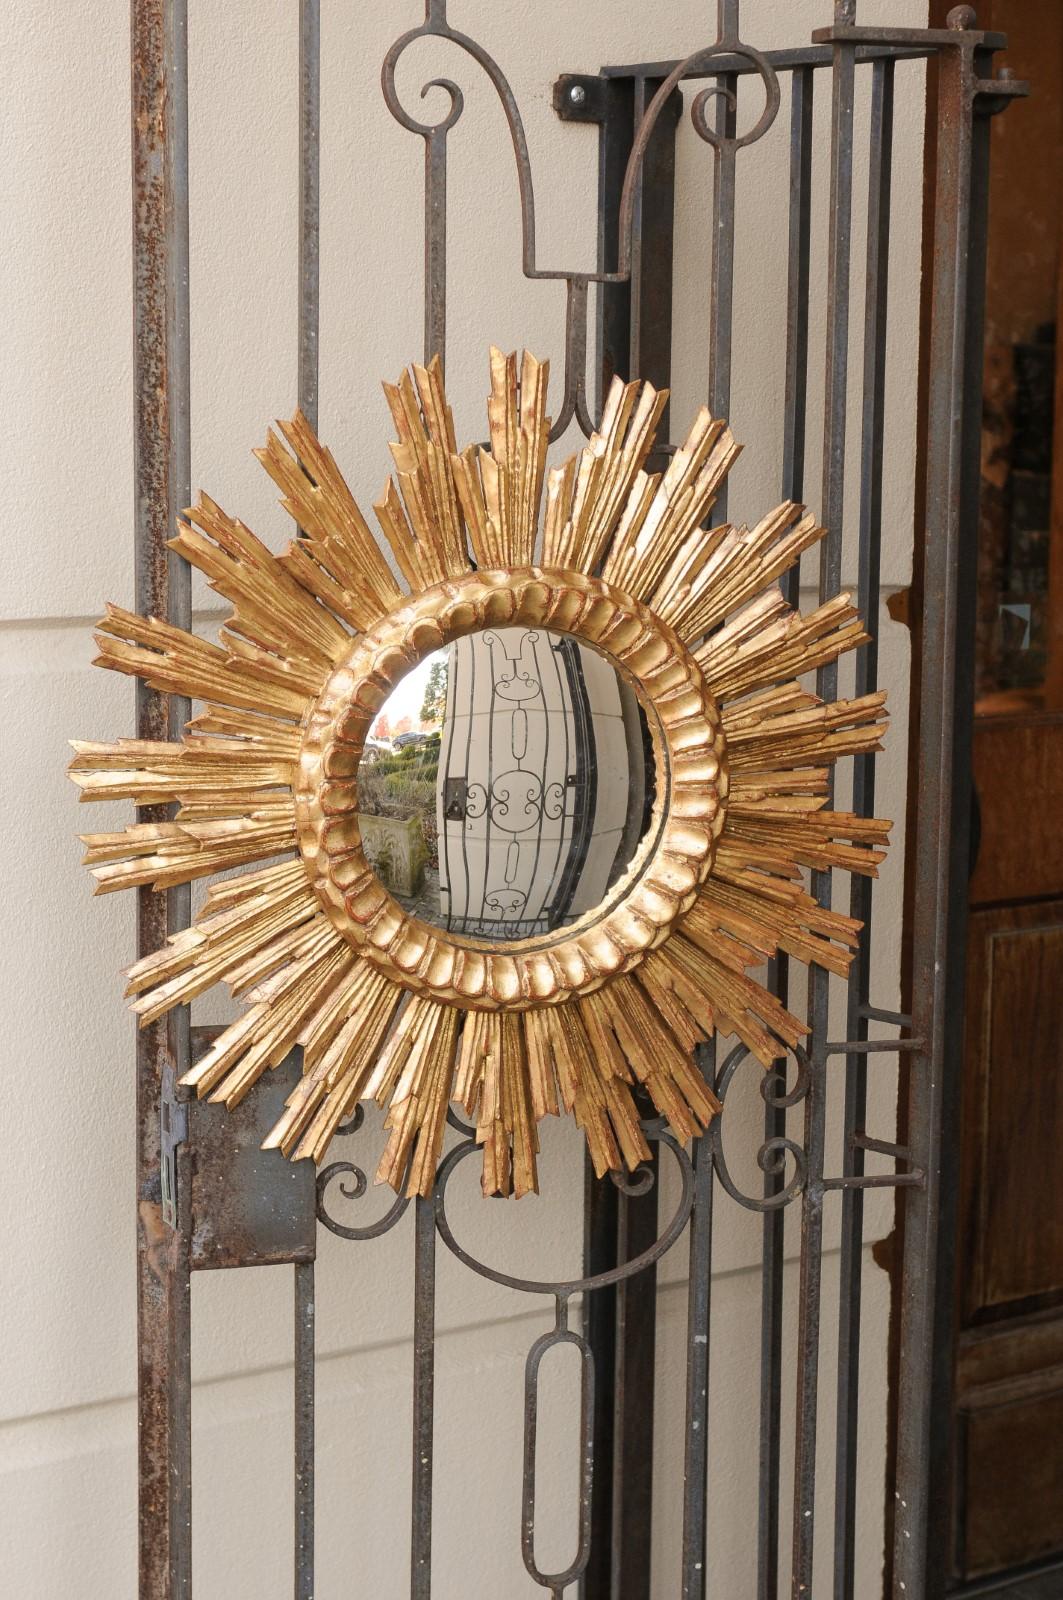 A vintage French giltwood sunburst mirror from the mid-20th century, with layered rays and convex mirror plate. Born in France during the midcentury period, this exquisite sunburst mirror features a convex central mirror plate providing a charming